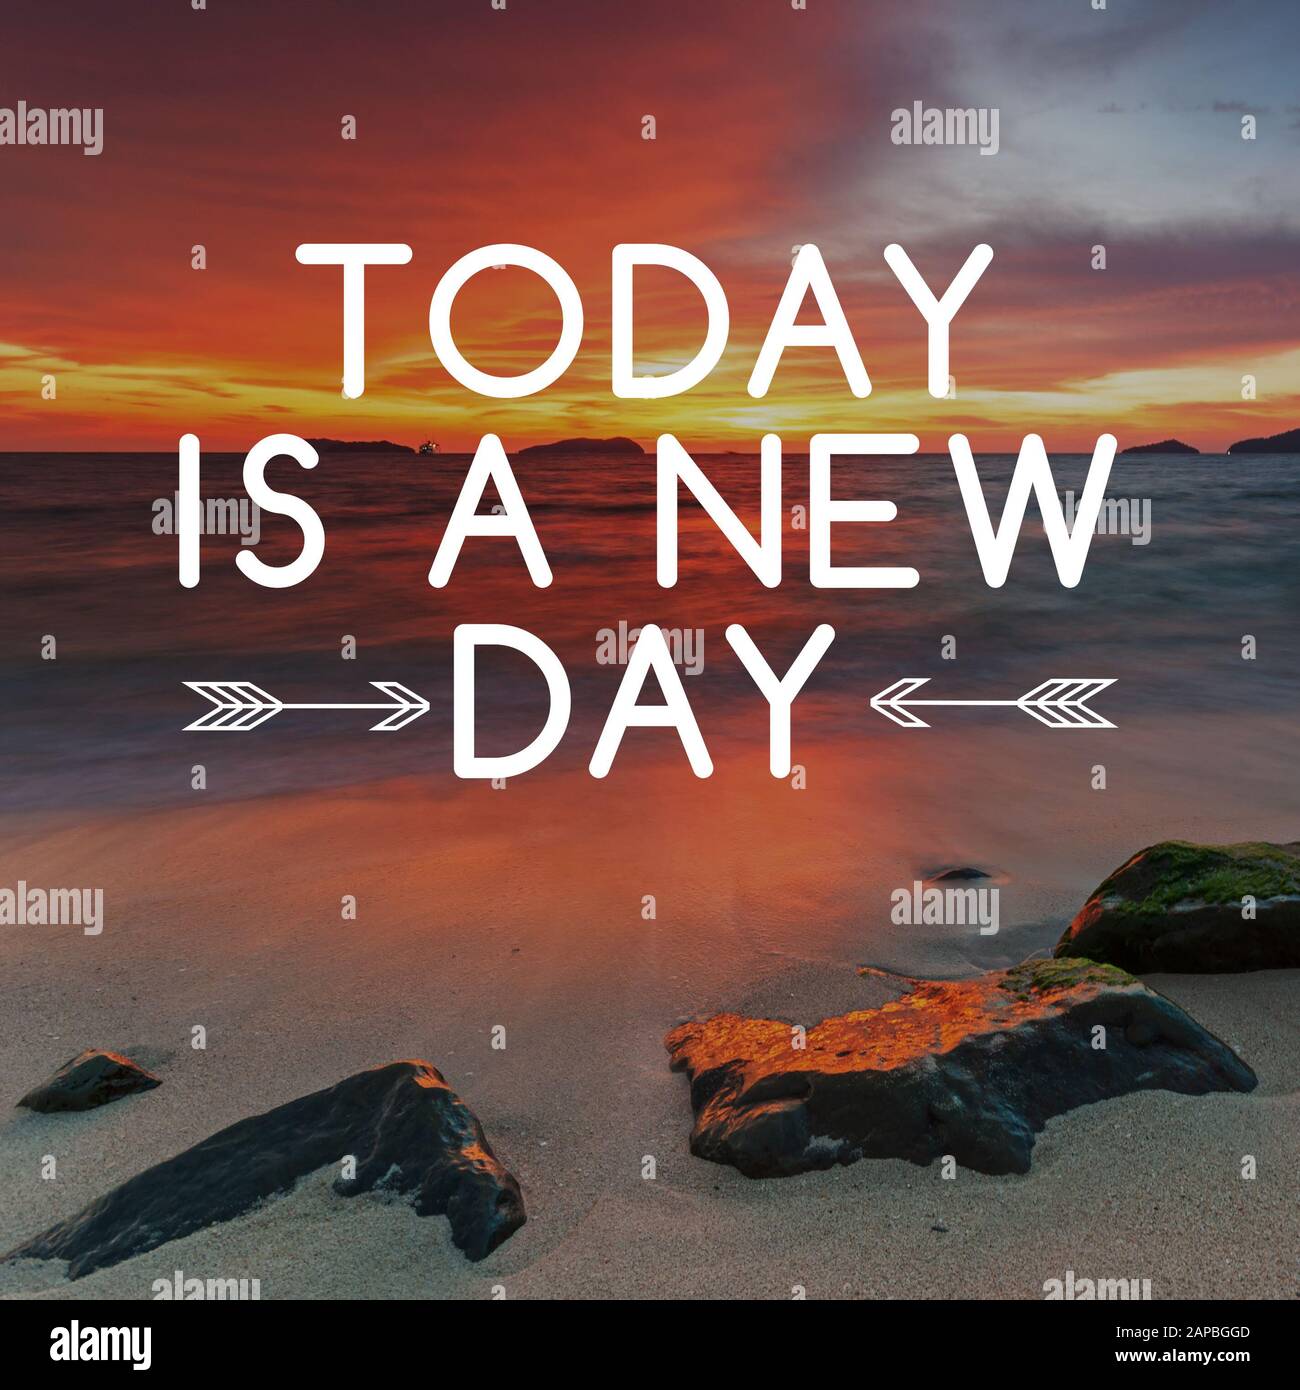 Motivational and Life Inspirational Quotes - Today is a new day. Blurry ...